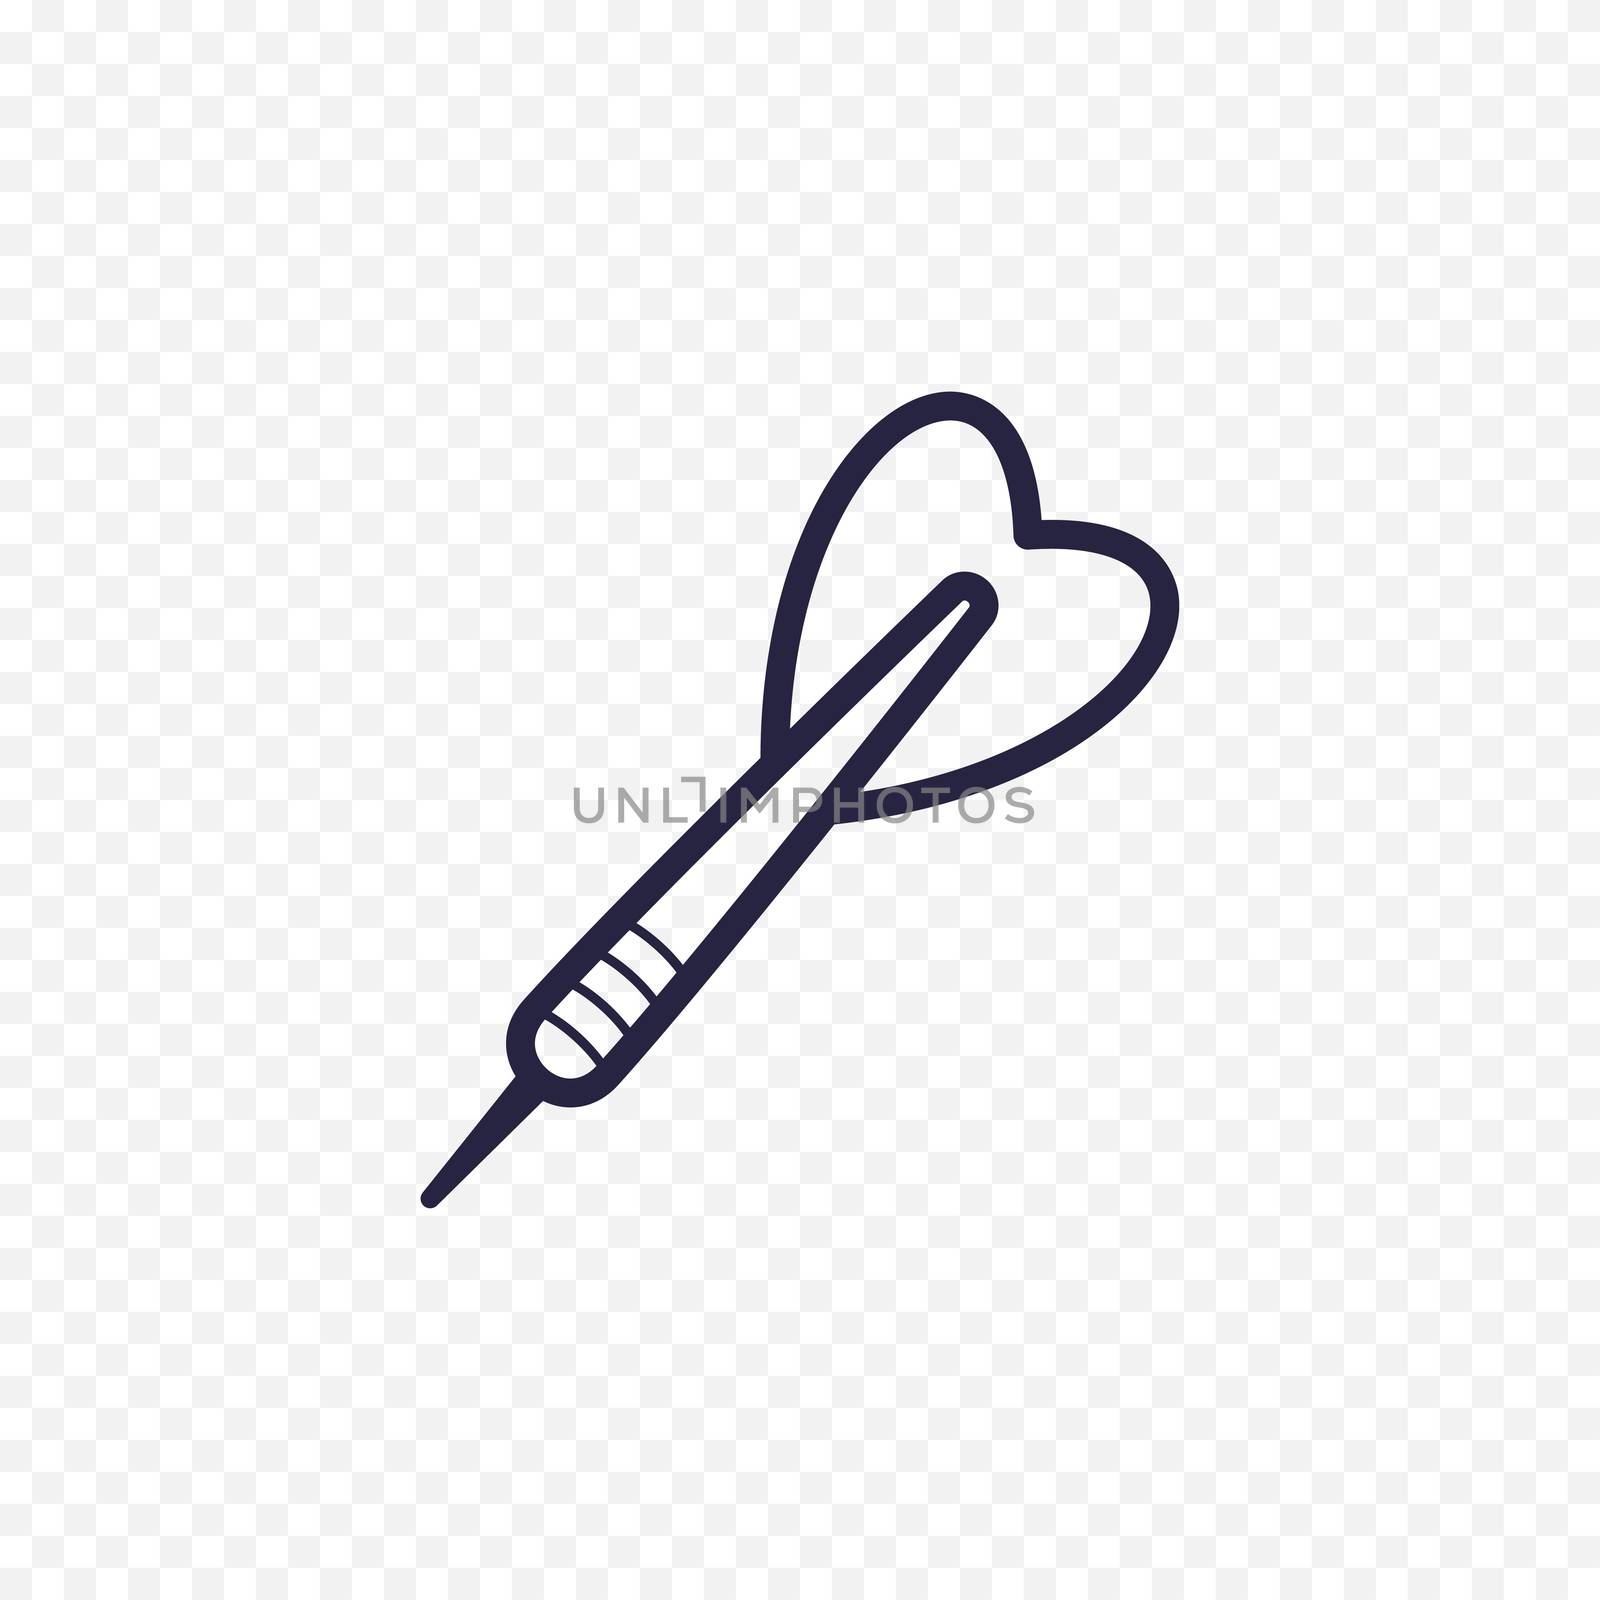 Dart simple line icon. Darts game thin linear signs. Outline sport simple concept for websites, infographic, mobile app.